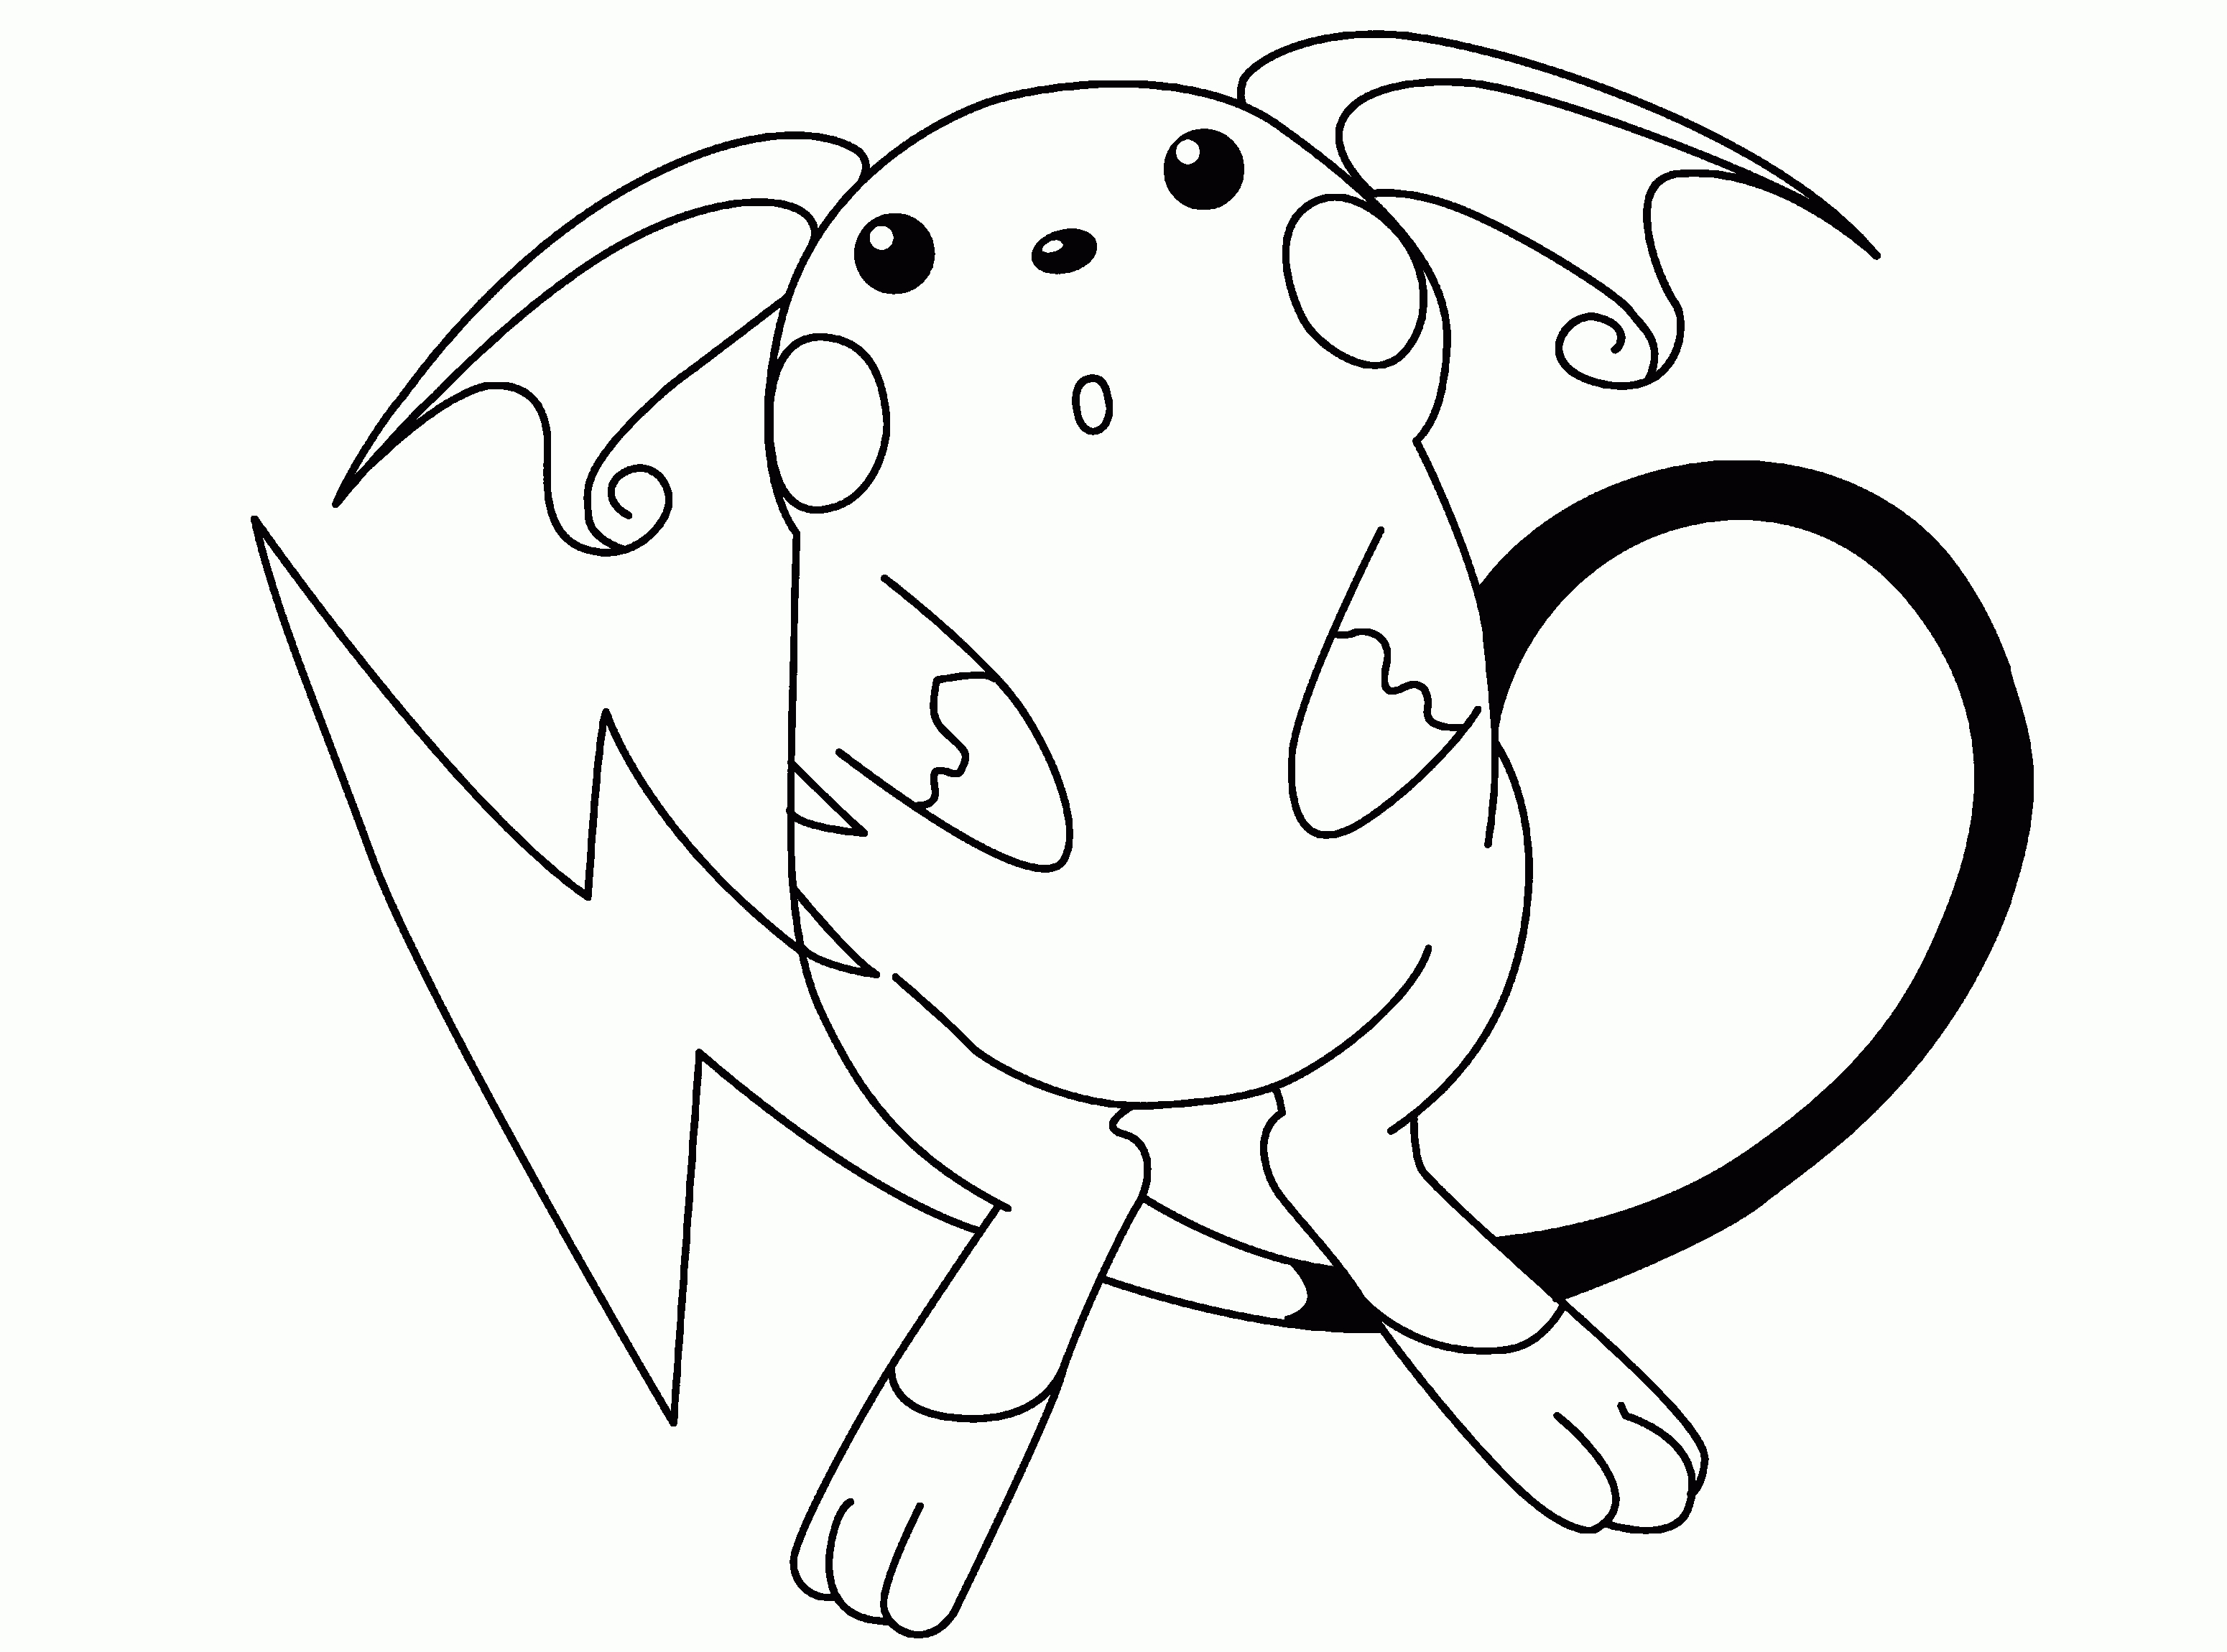 Free Printable Pokemon Coloring Pages For Kids #505 Pokemon Coloring - Free Printable Pokemon Coloring Pages